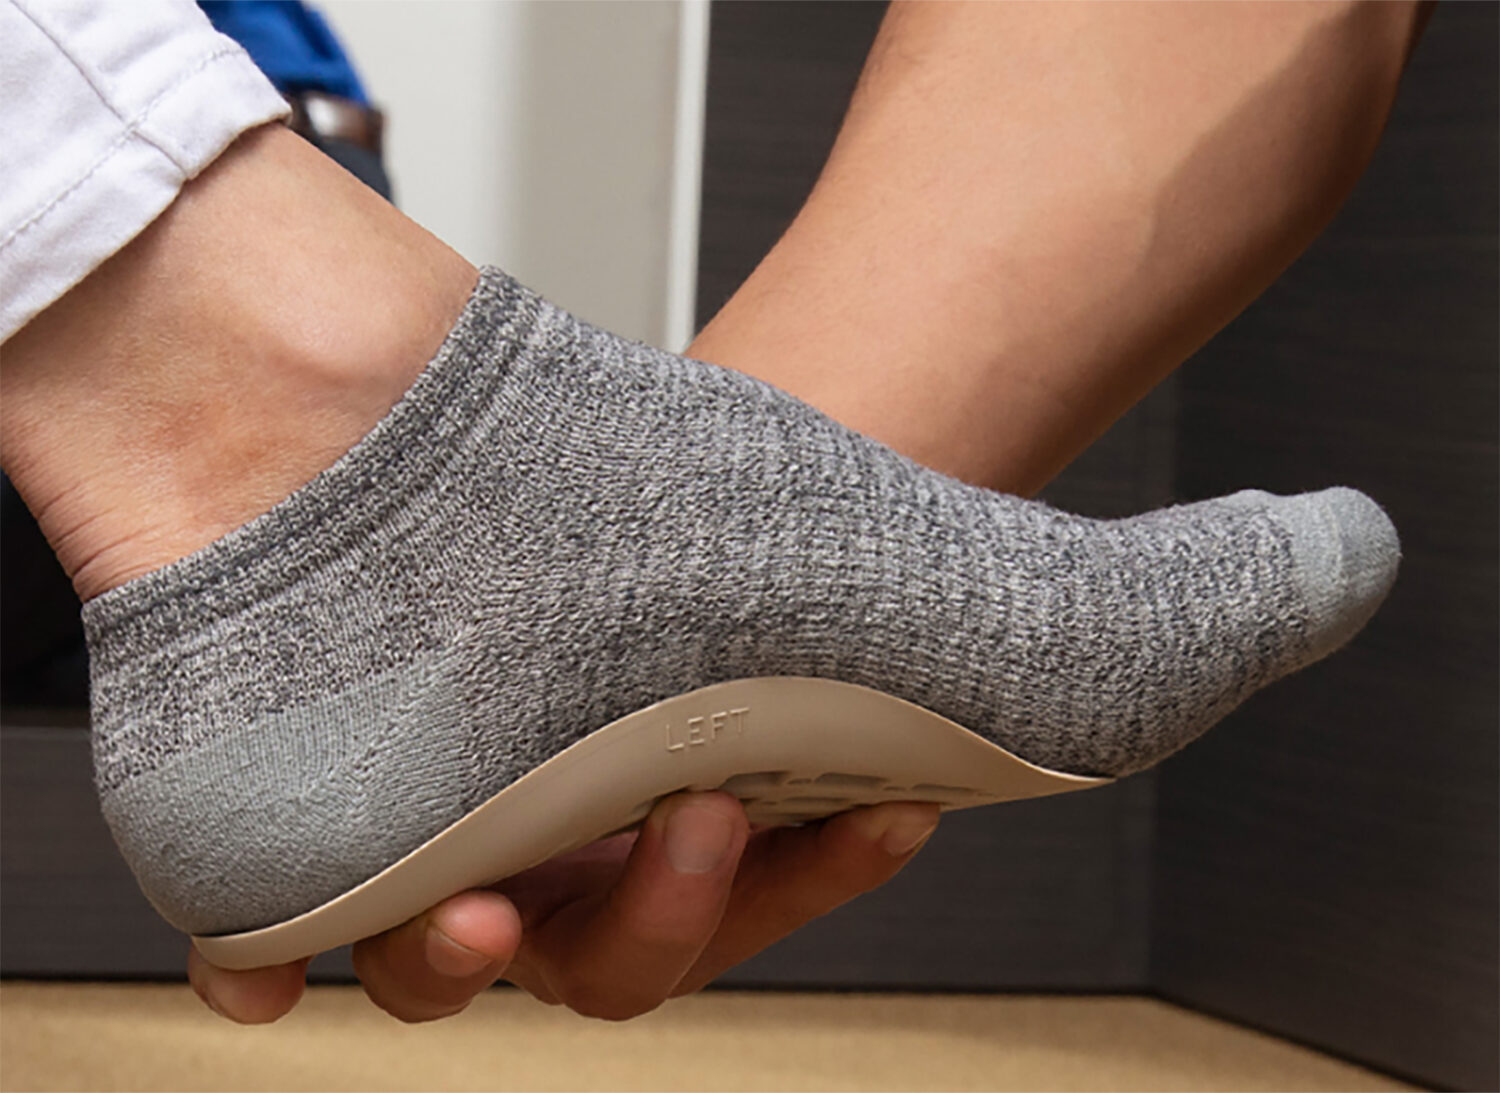 A single foot in a grey sock is held by a hand. The foot is supported by a Good Feet Arch Support in between the sock and hand.